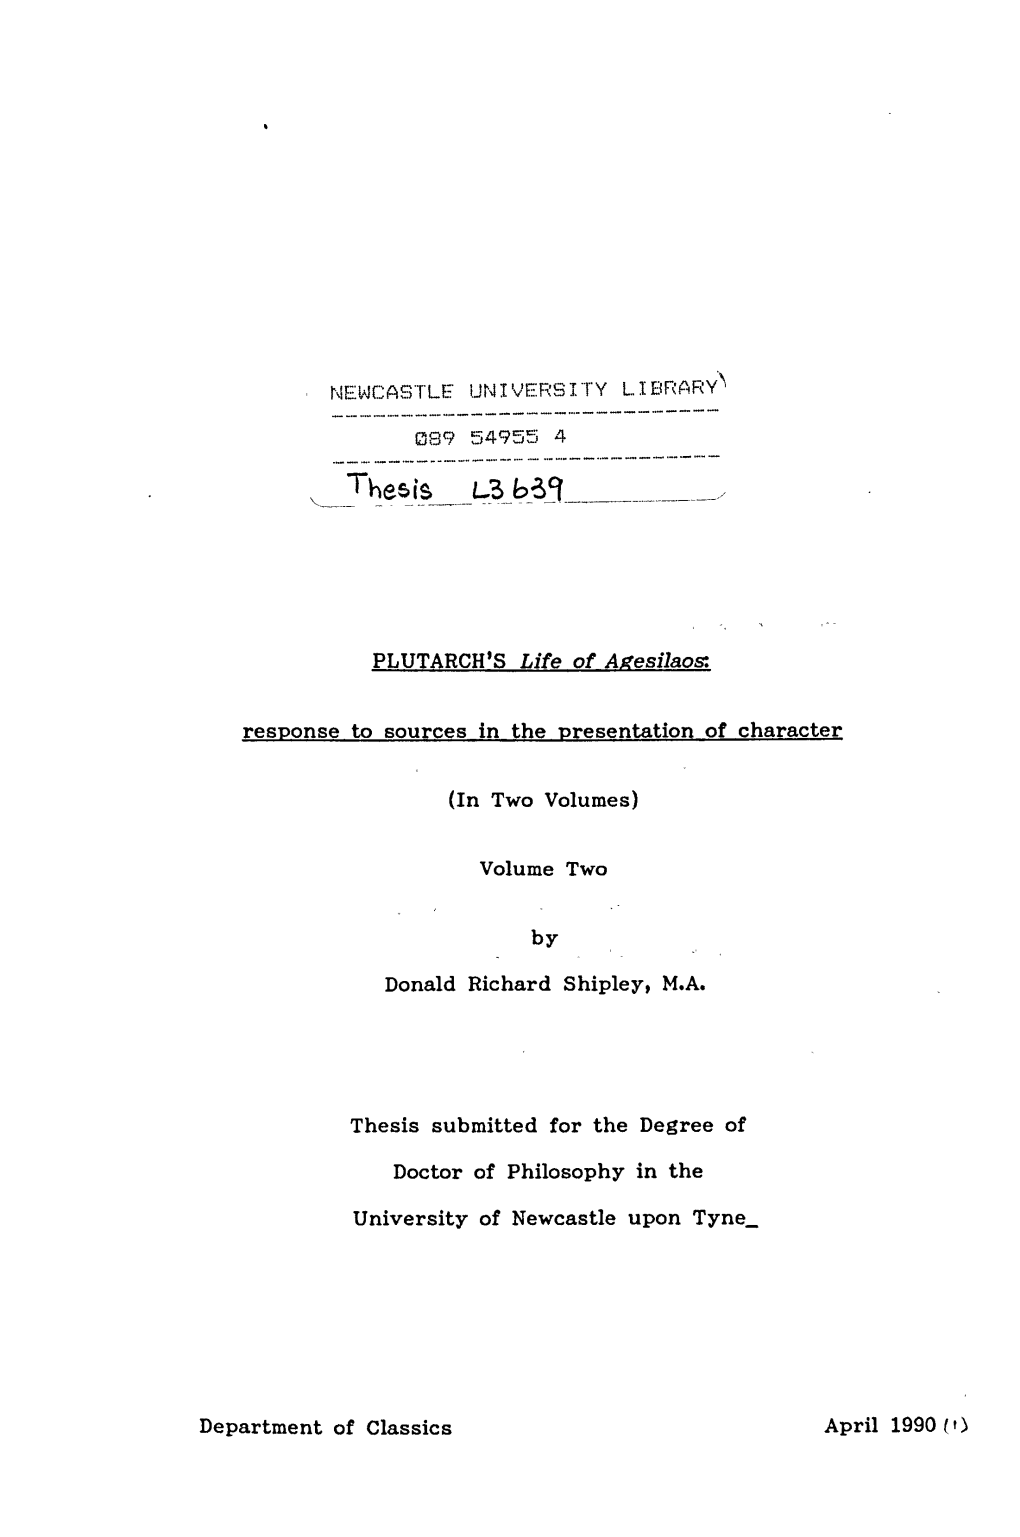 PLUTARCH's Life of Agesilaosm Response to Sources in The